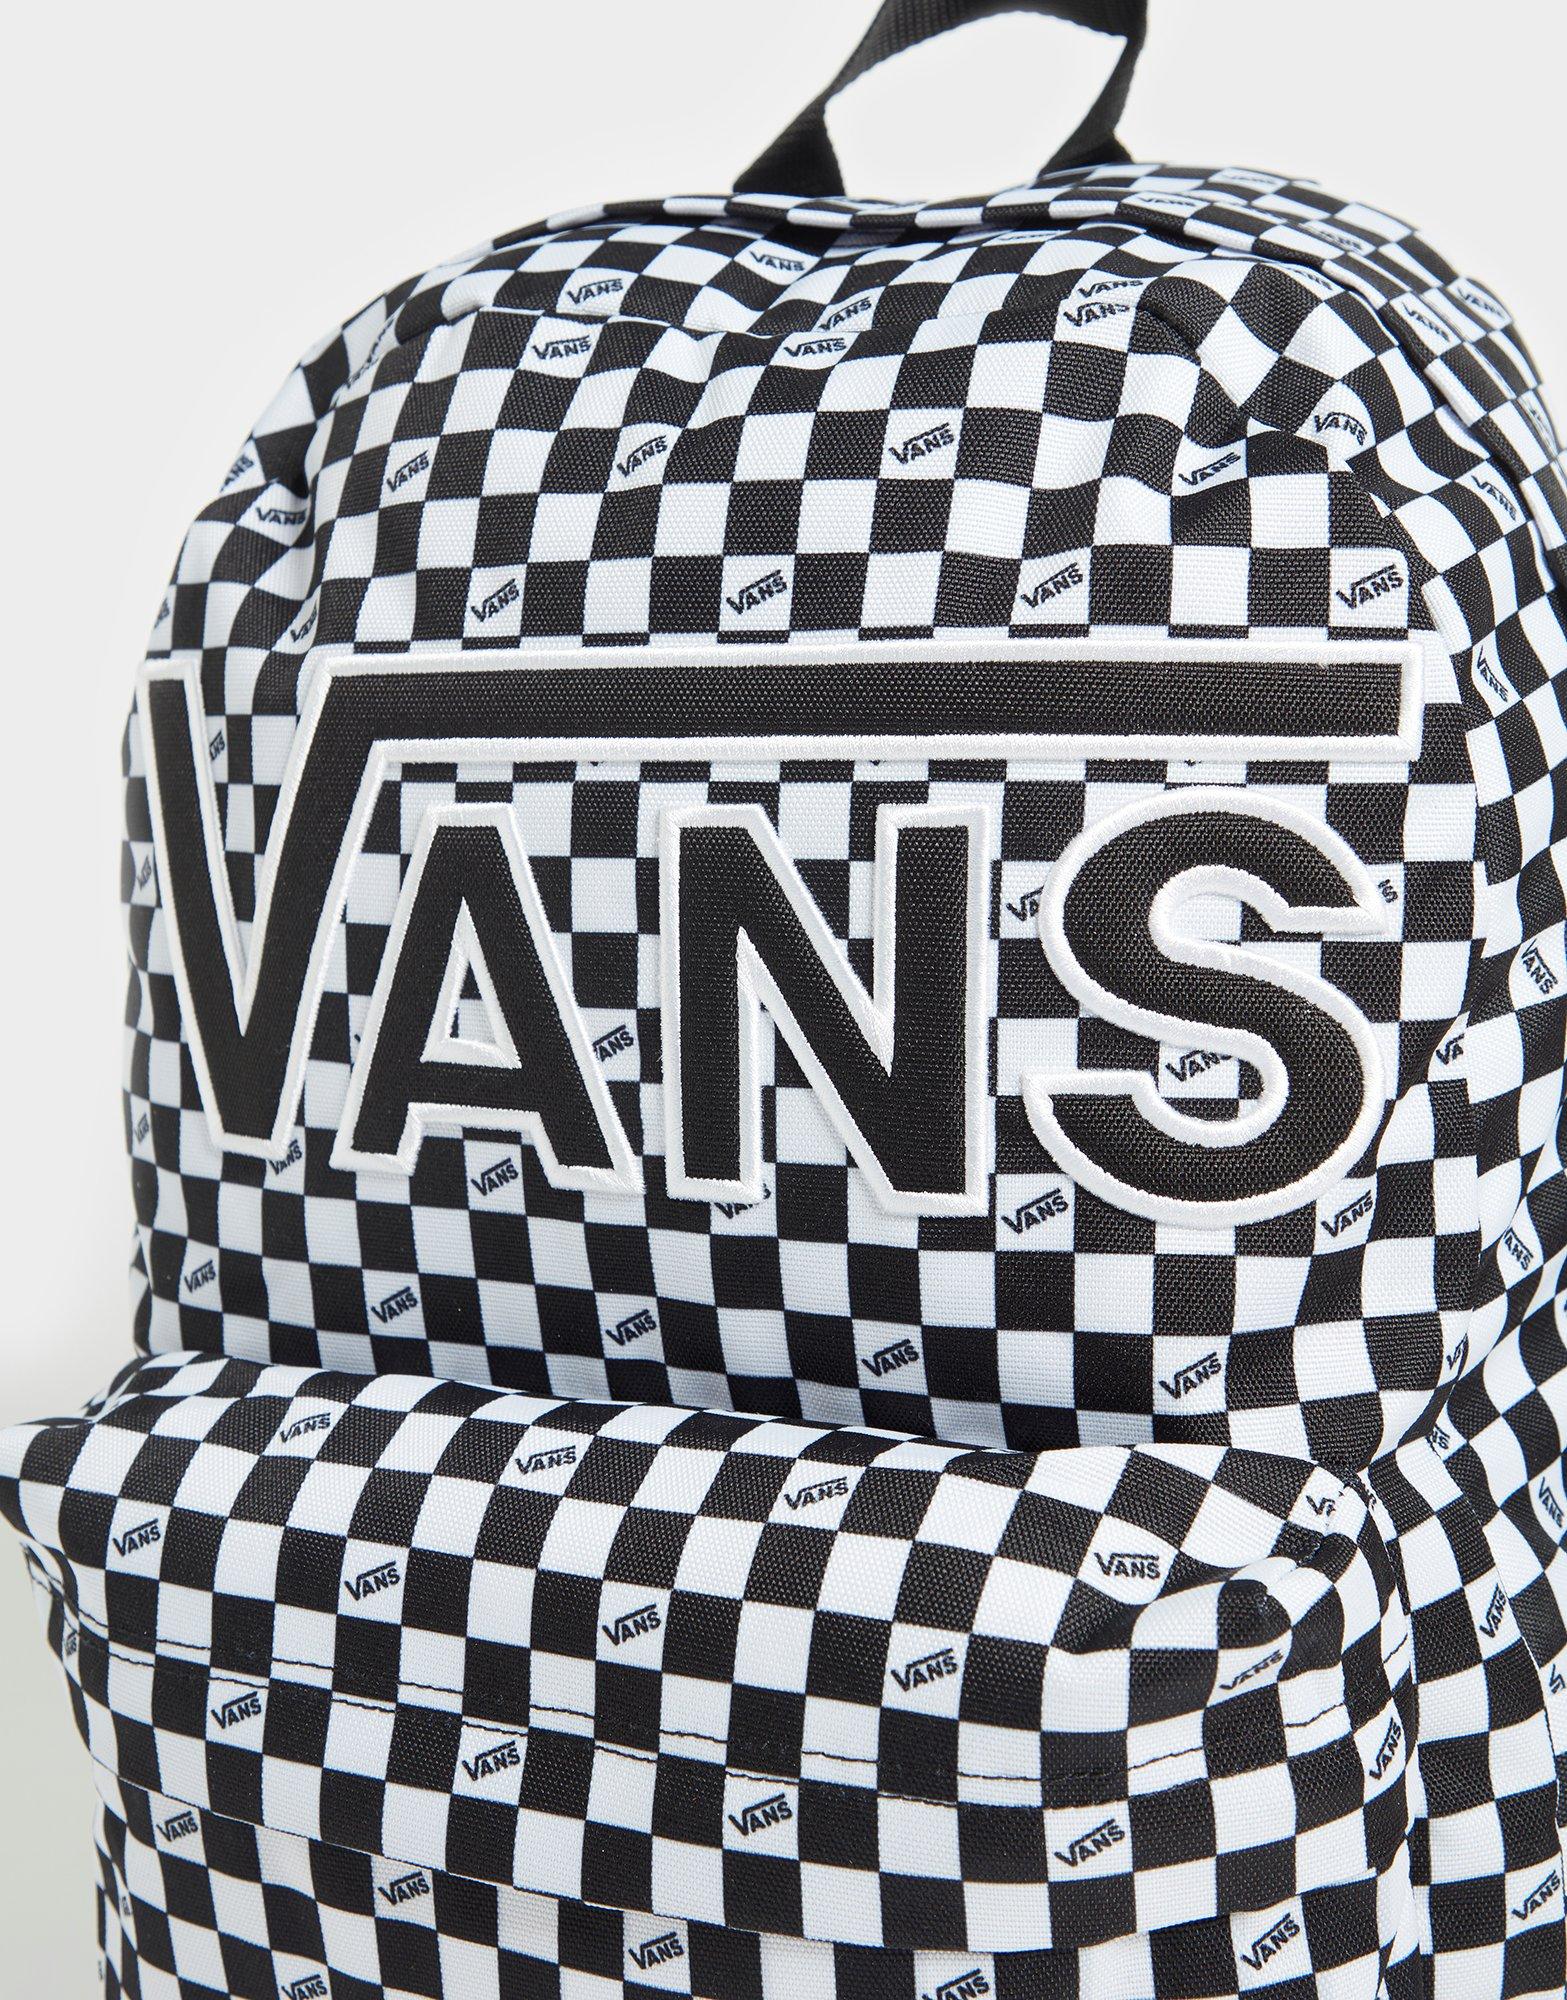 vans white and black checkered backpack